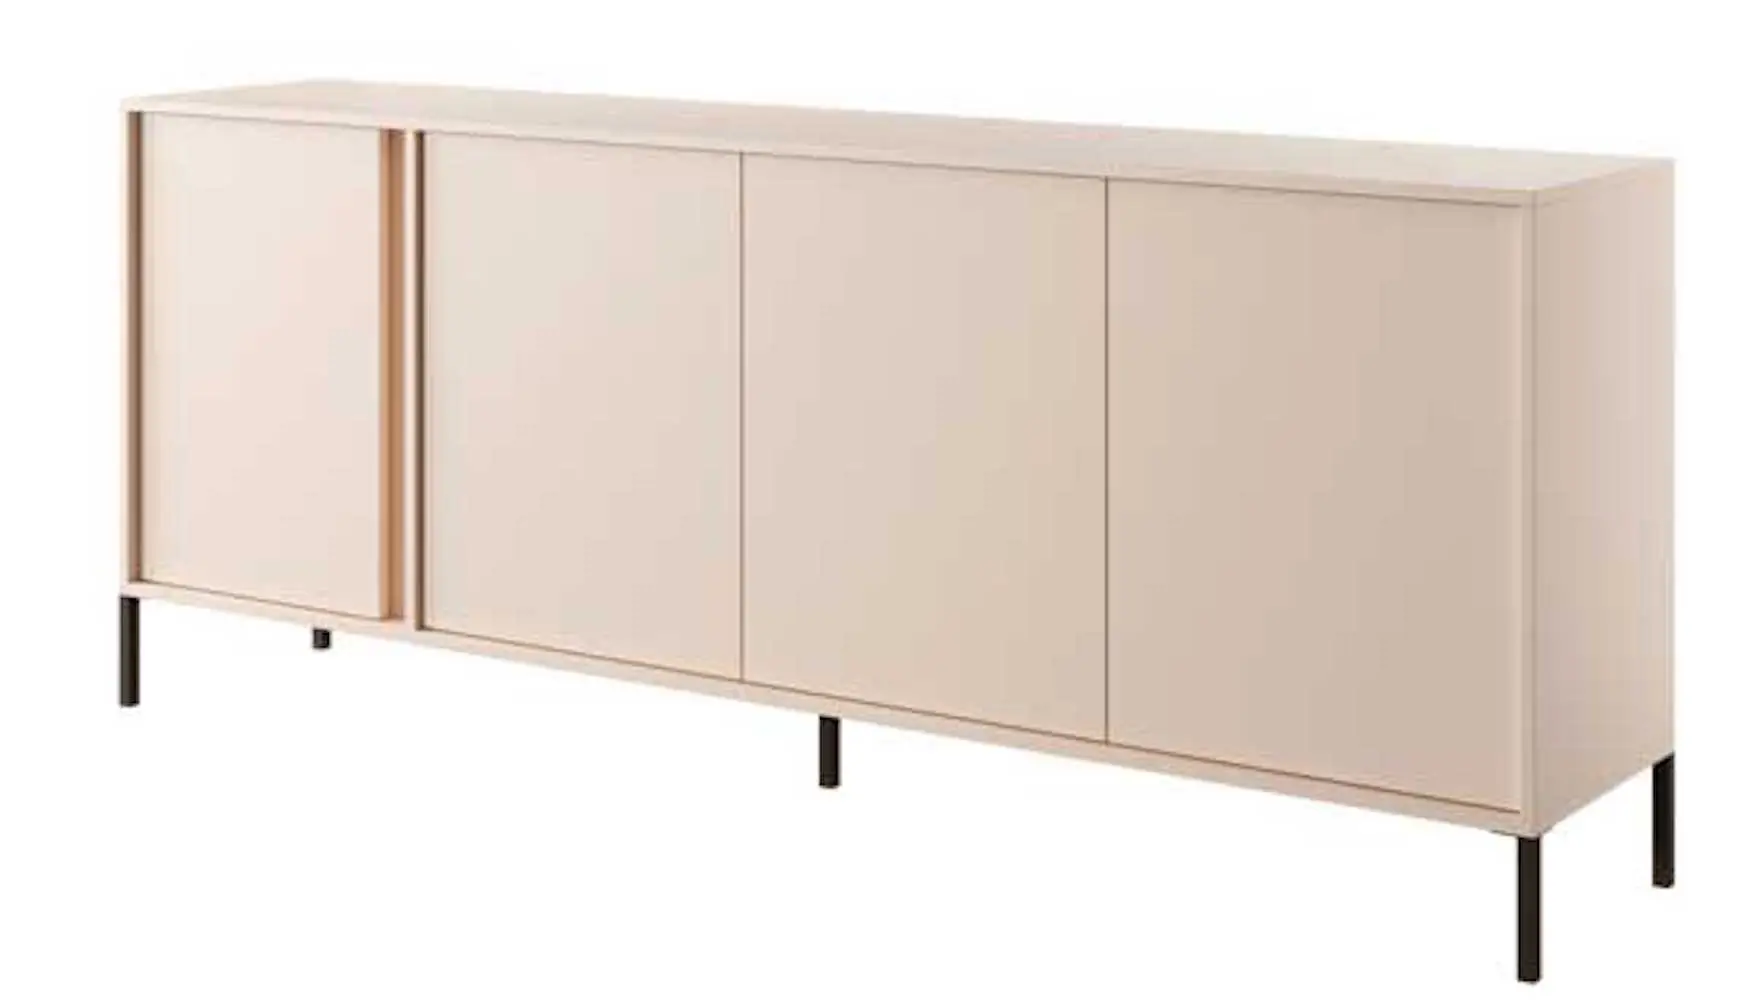 LED-Beleuchtung DAST ohne Sideboard